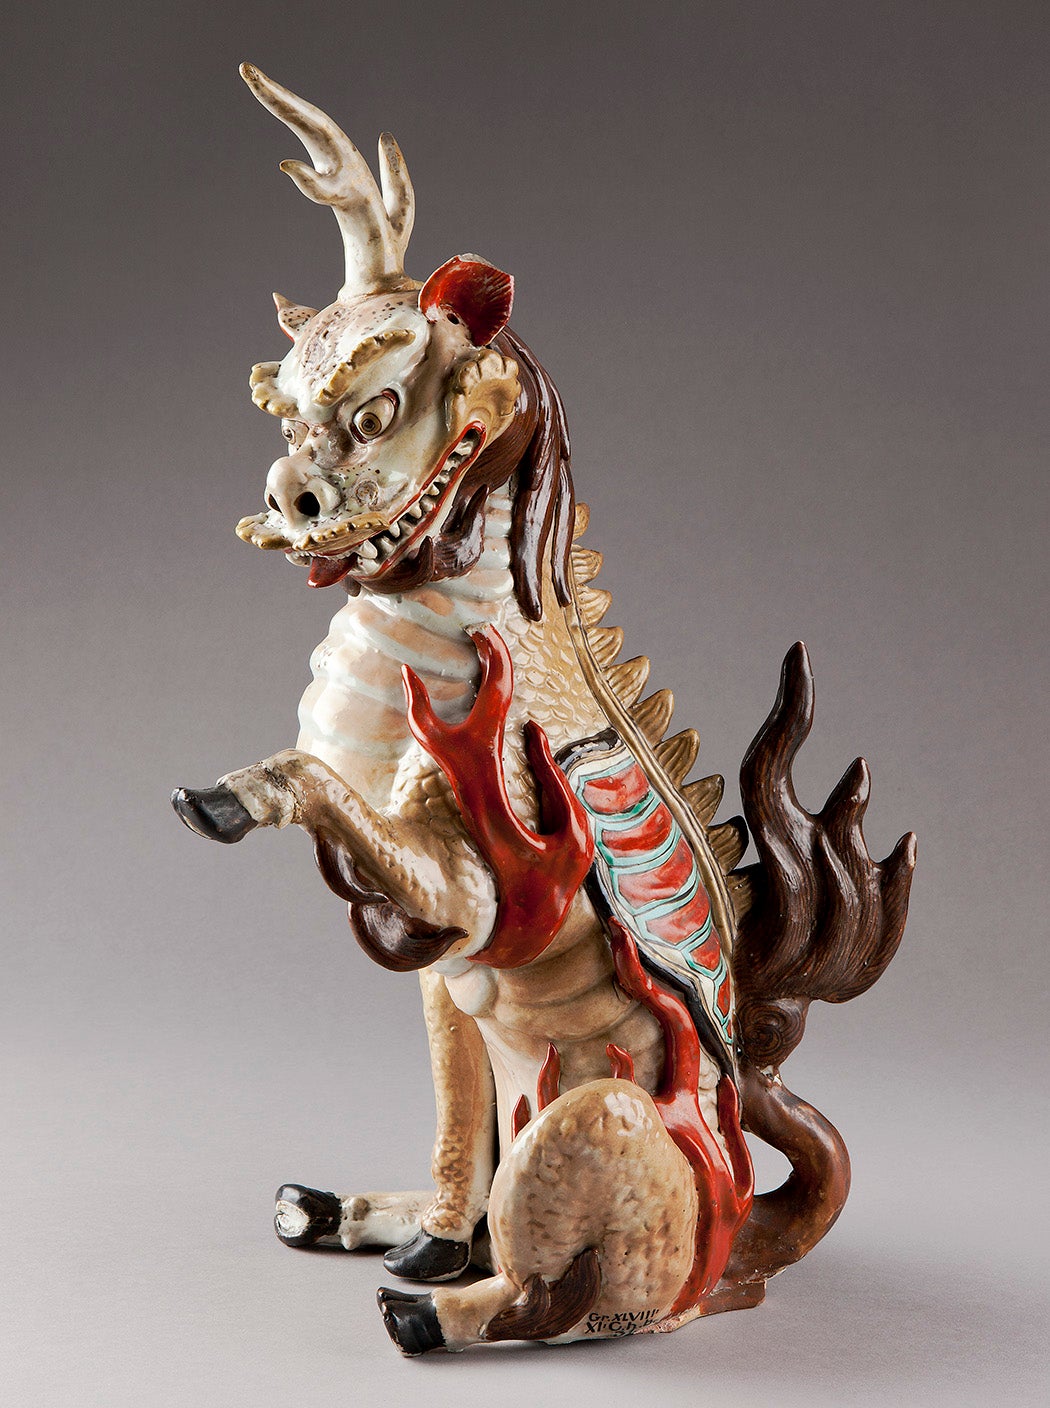 A qilin from China, c. 1750 